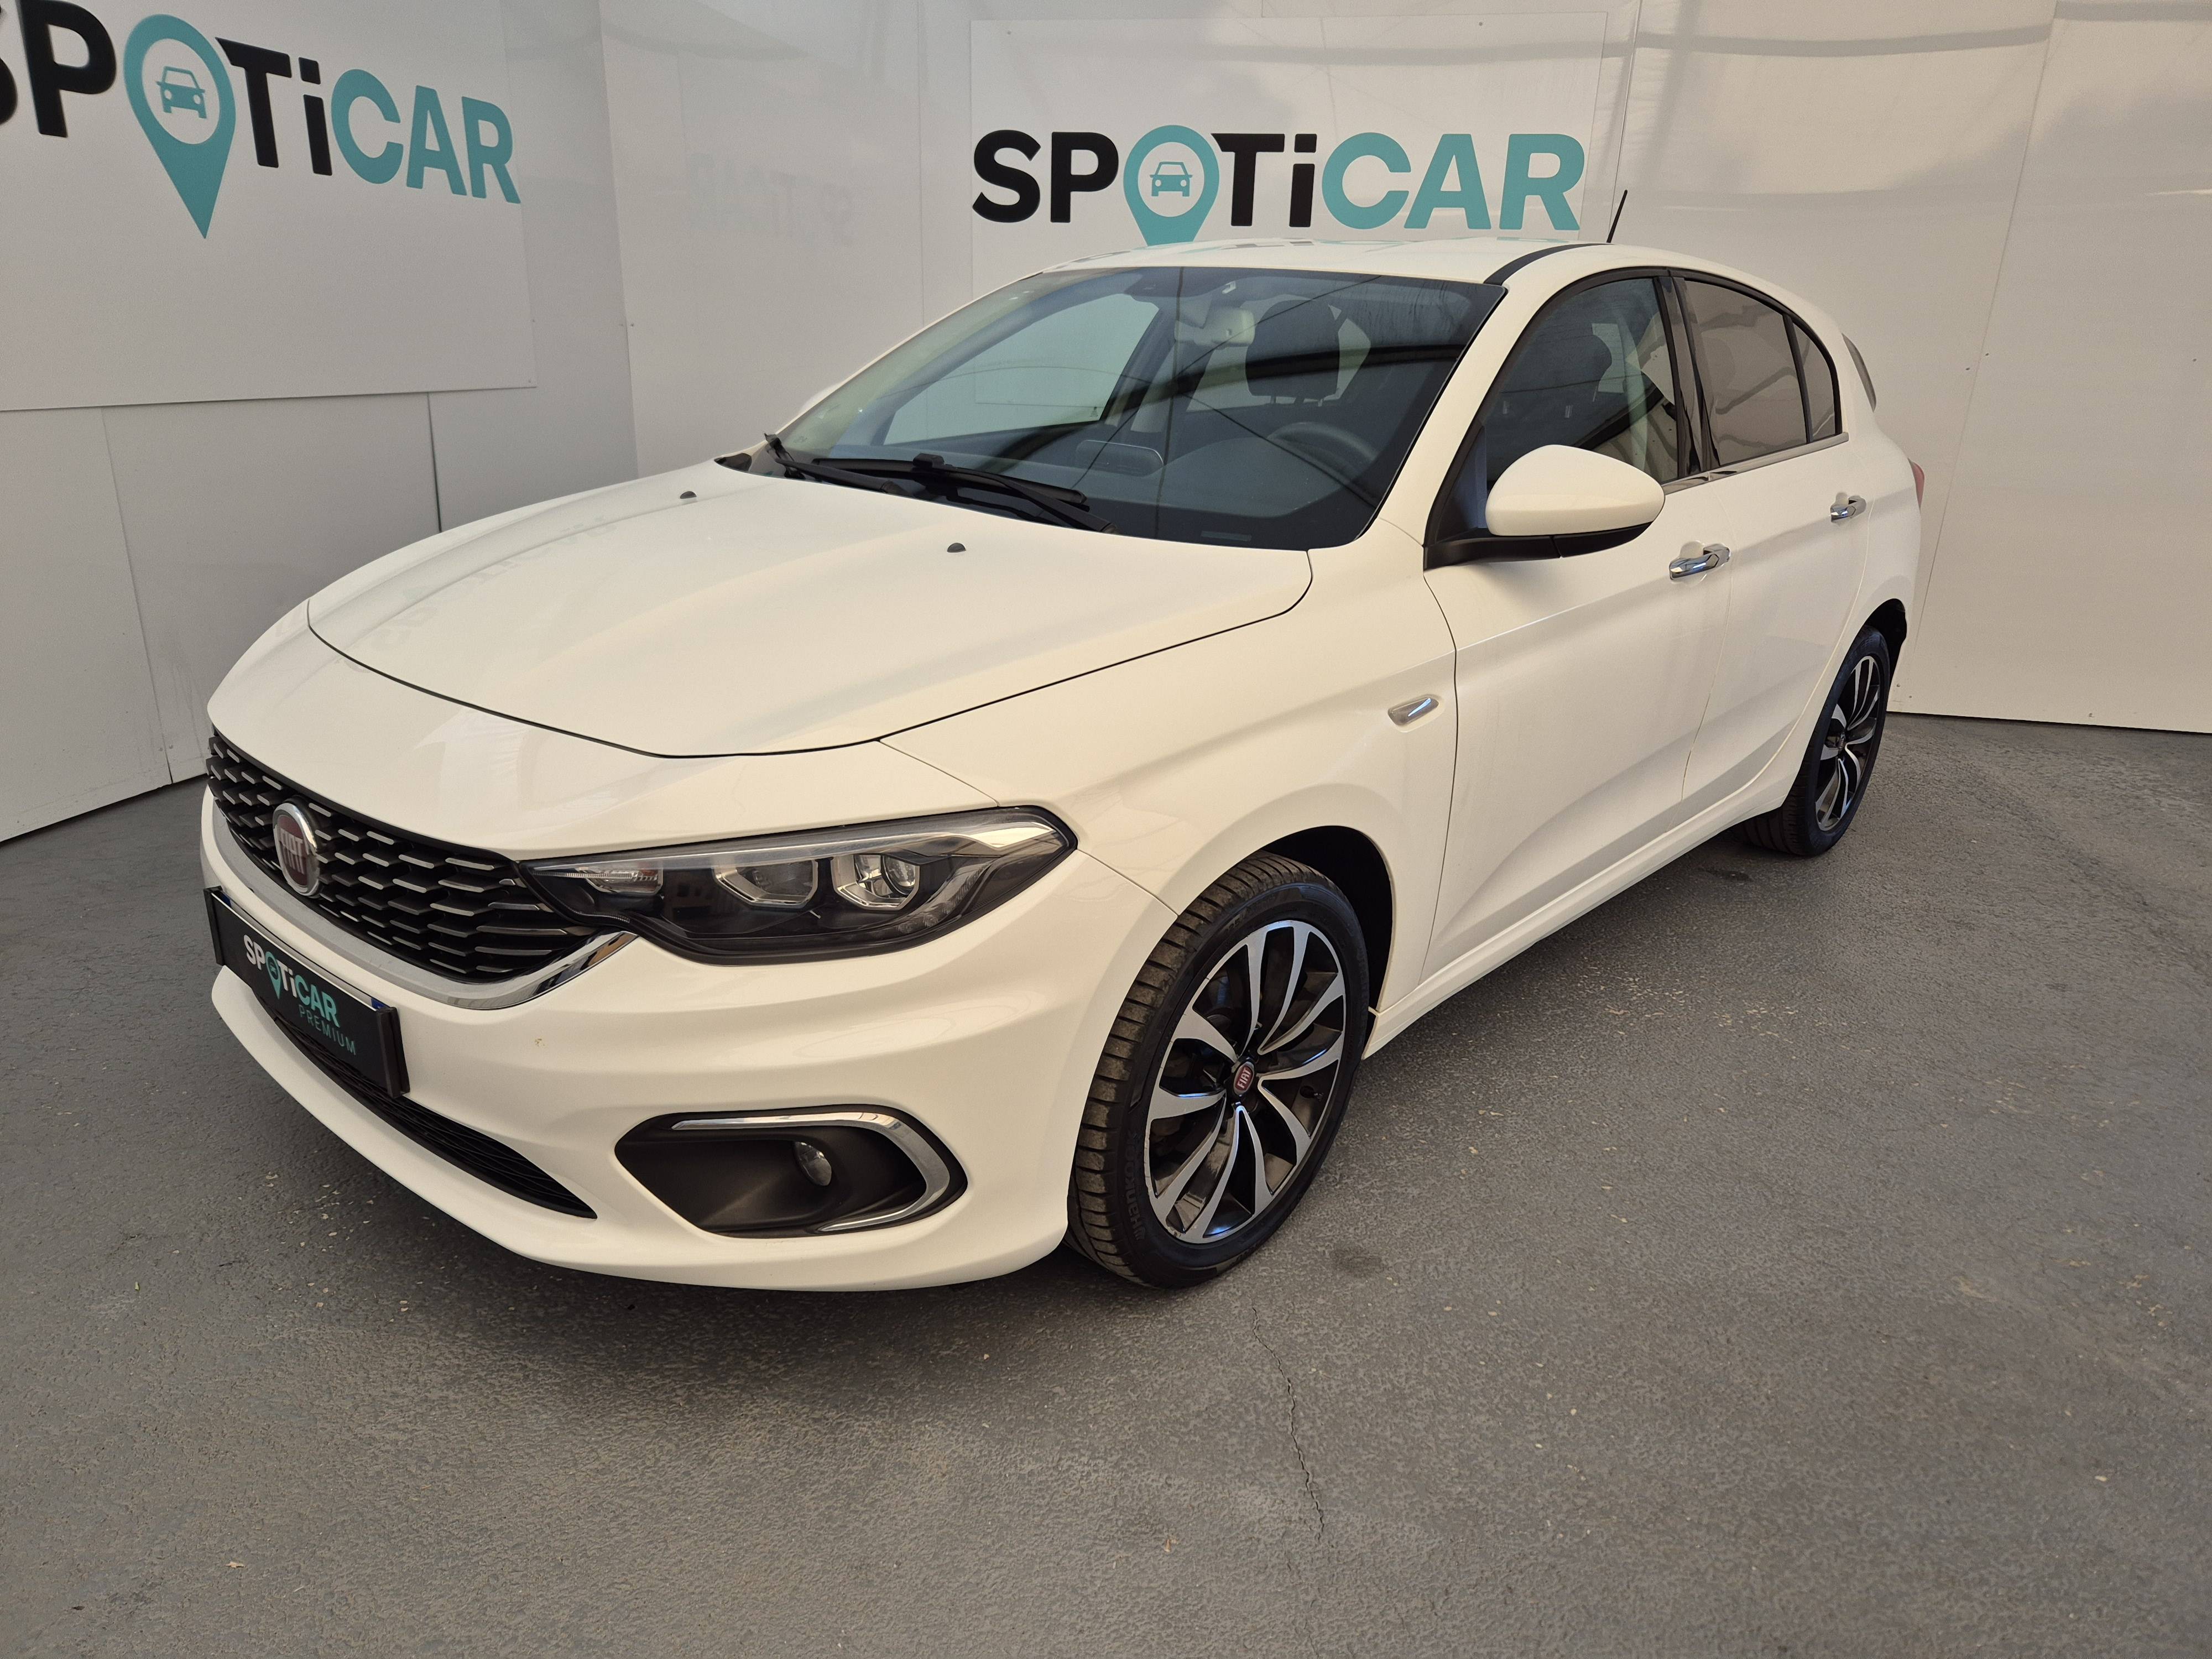 FIAT TIPO | Tipo 5 Portes 1.4 T-Jet 120 ch Start/Stop occasion - Peugeot Cavaillon